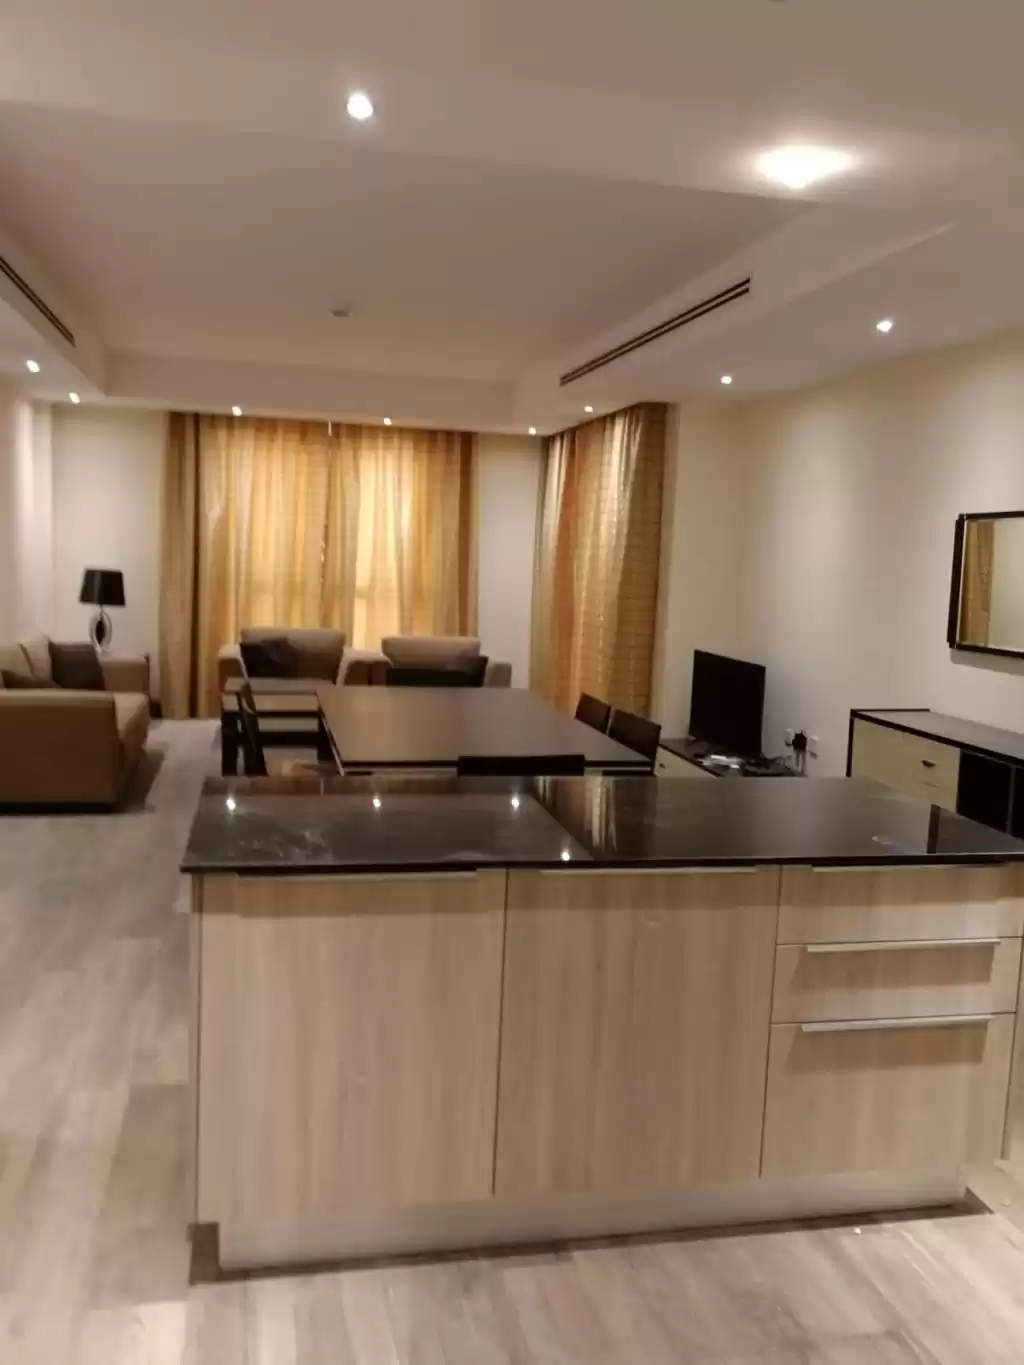 Residential Ready Property 1 Bedroom F/F Apartment  for rent in Al Sadd , Doha #10362 - 1  image 